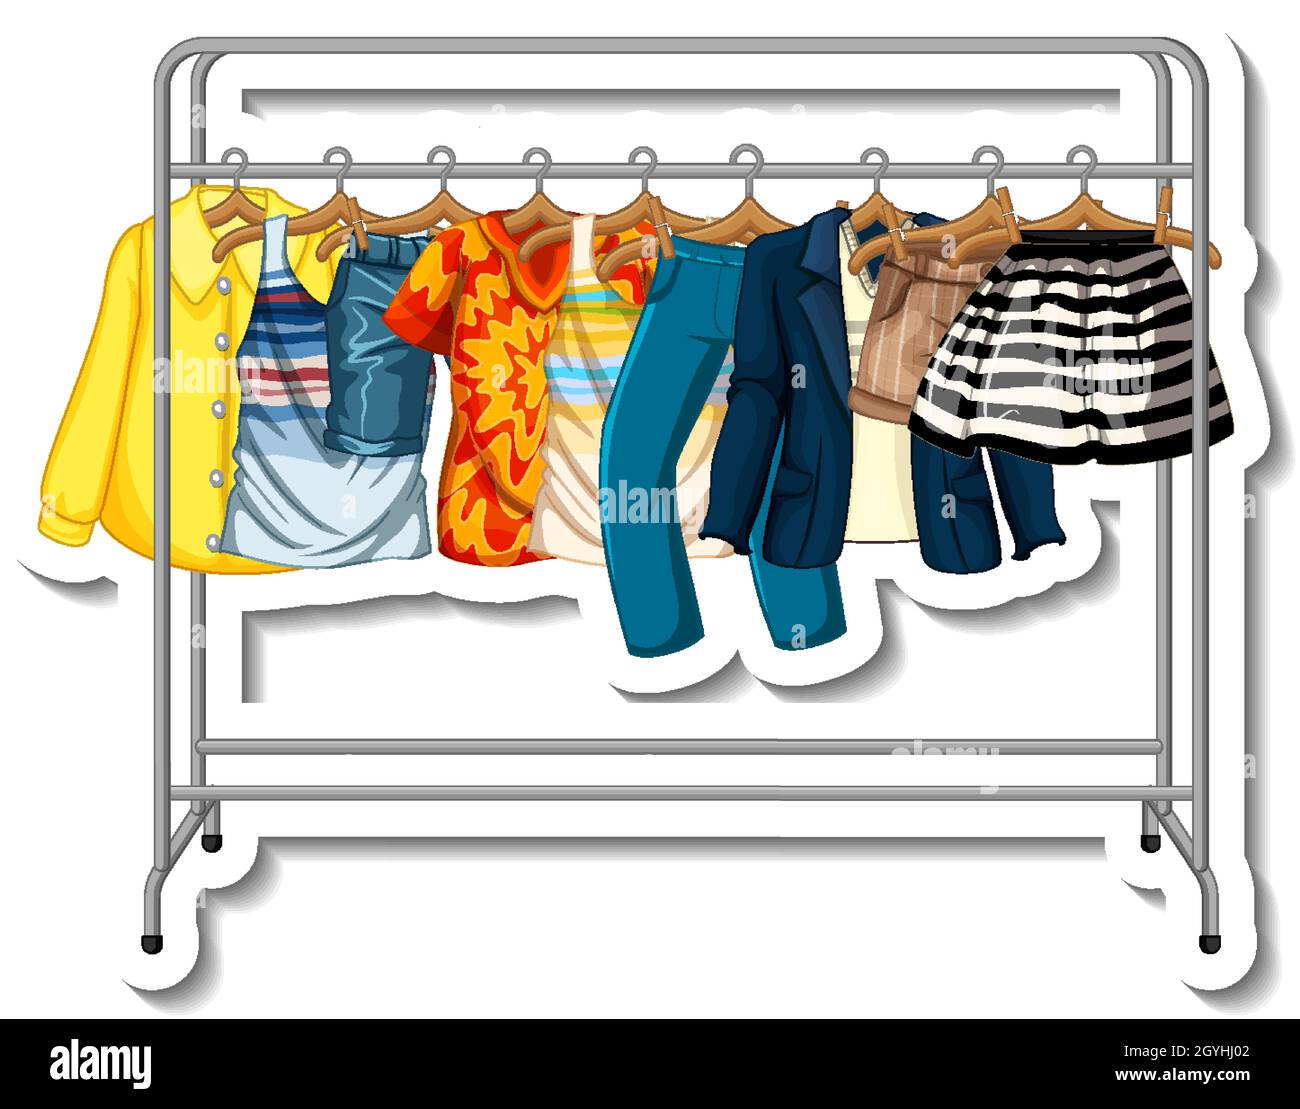 A sticker template of Clothes racks with many clothes on hangers on ...